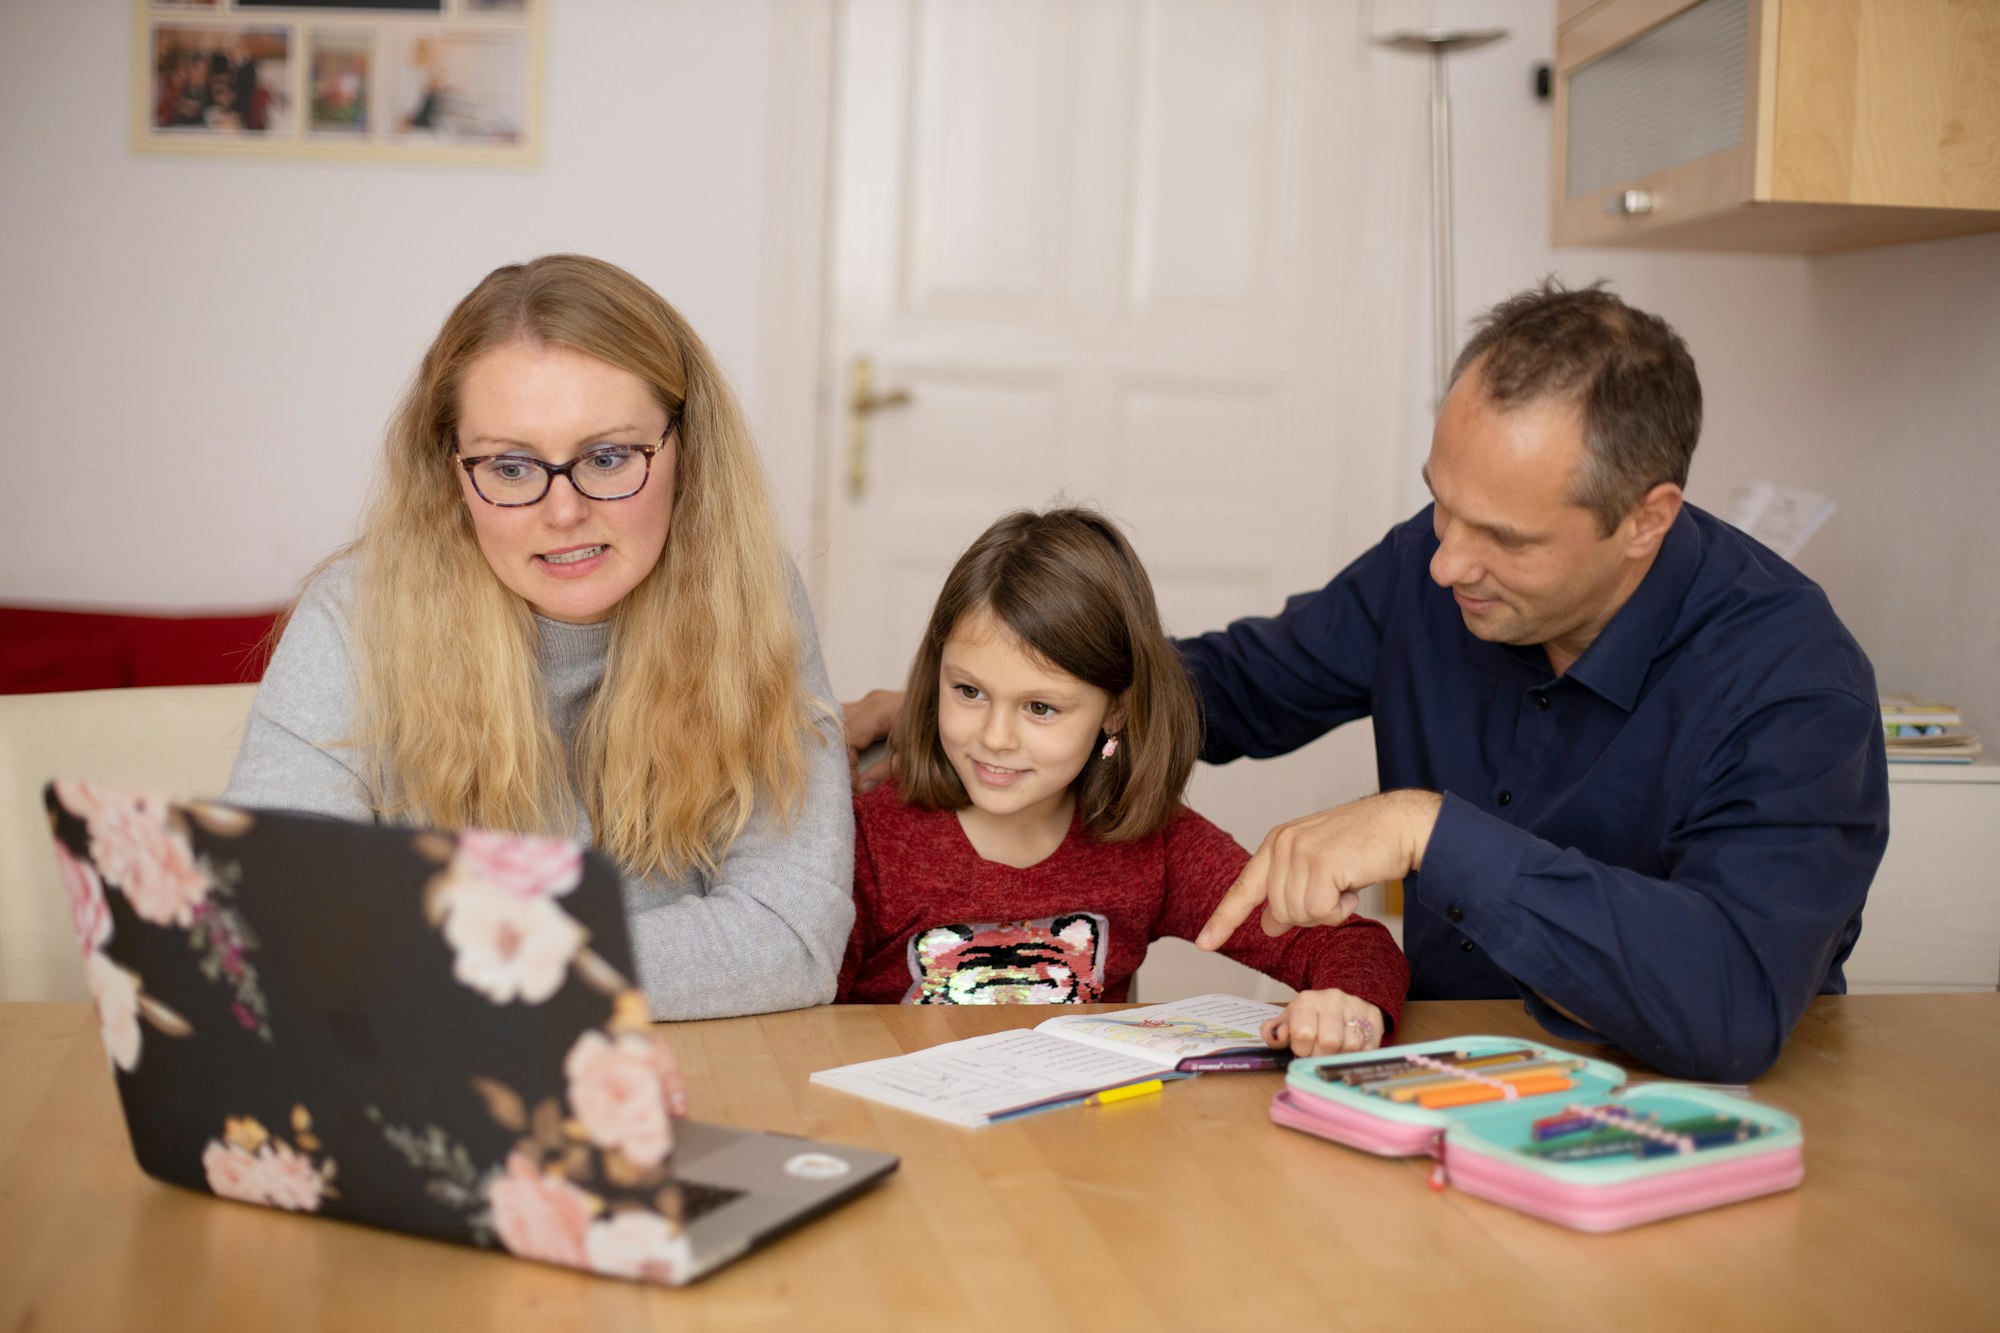 Parents learning together with their child during homeschooling.